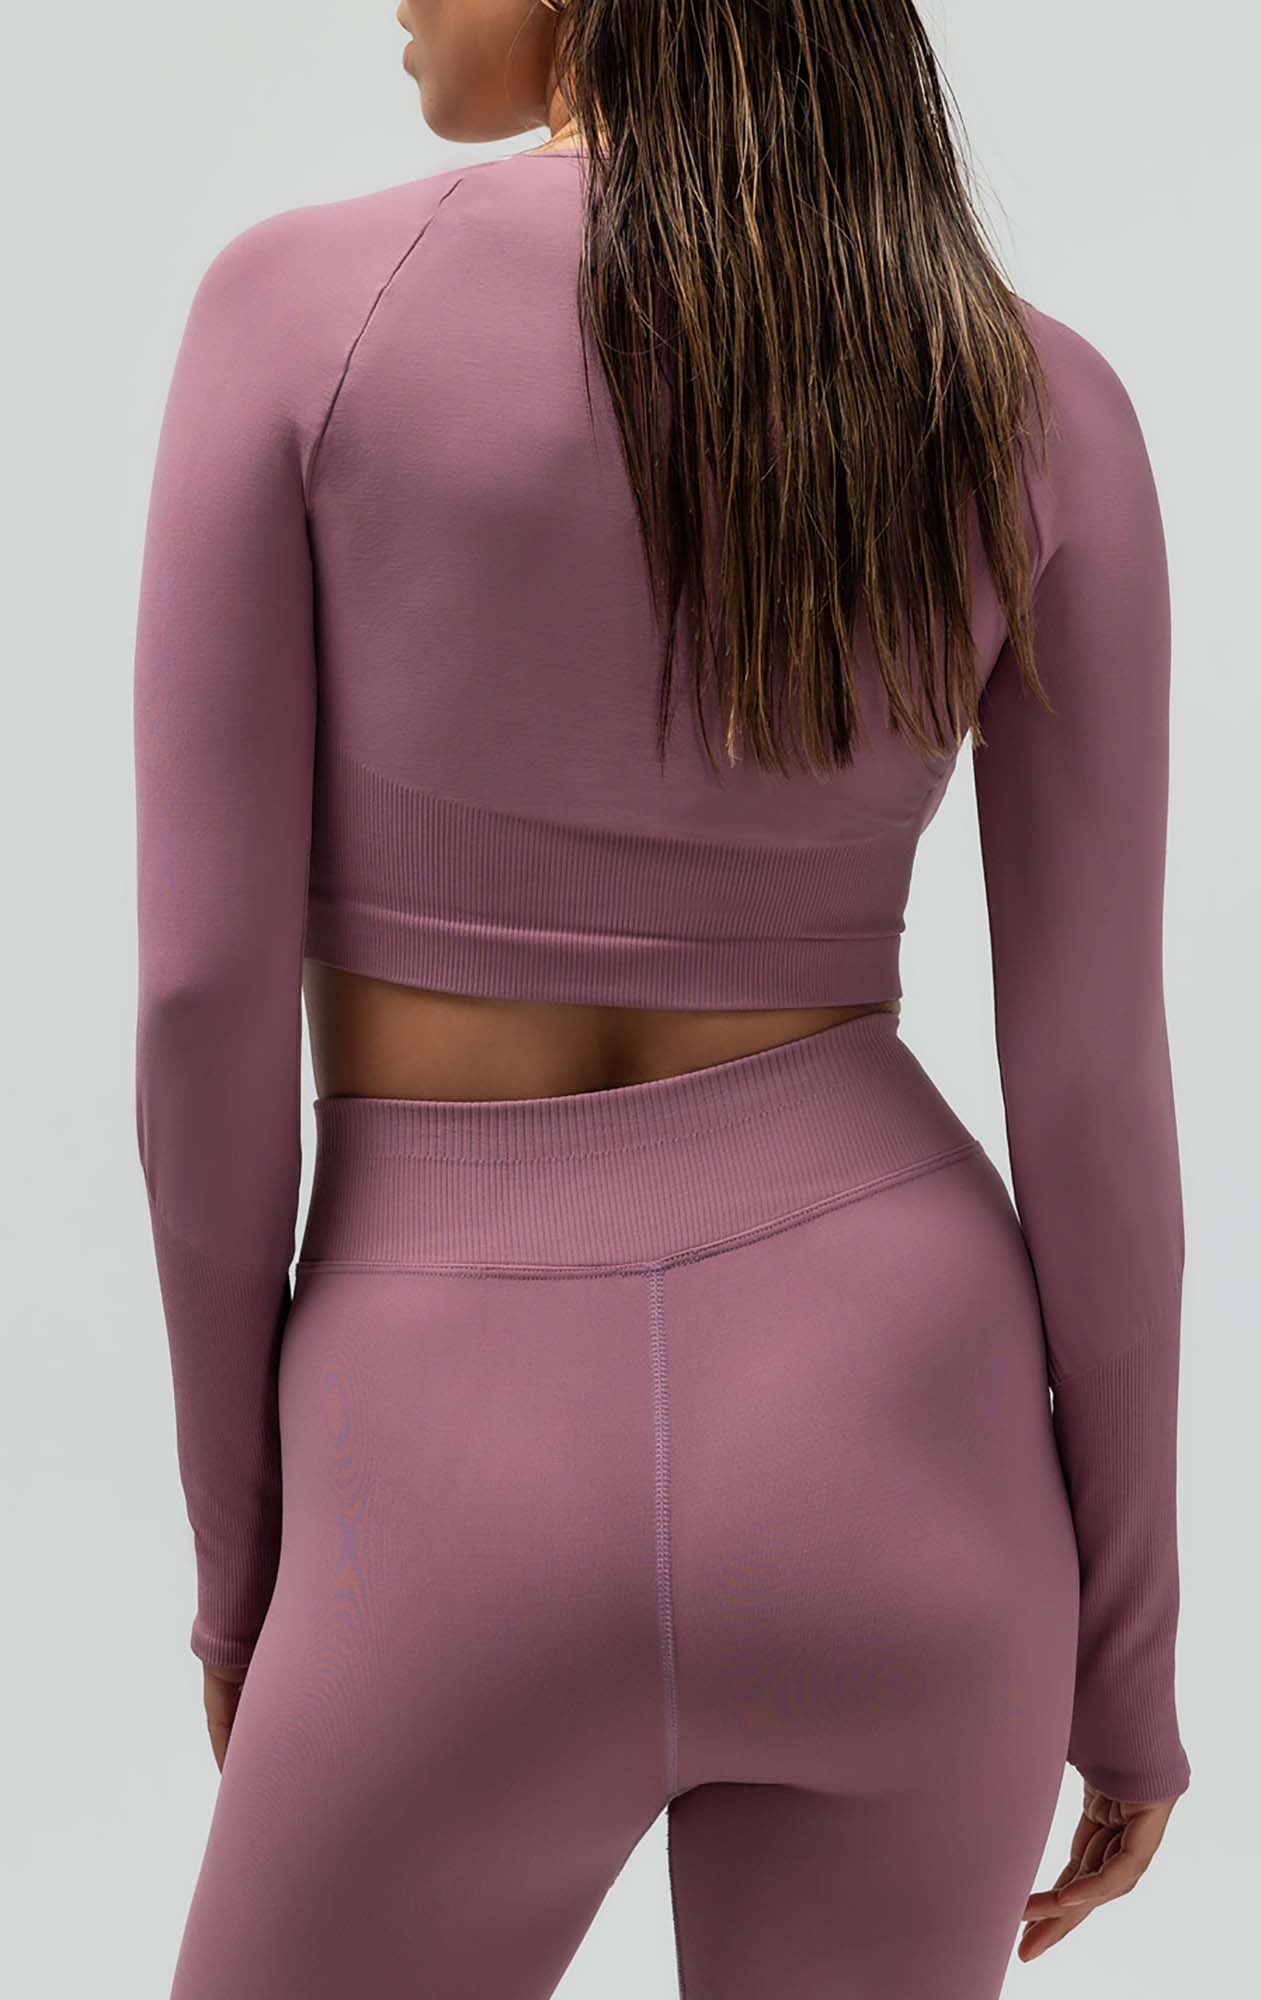 THE V-NECK LONG SLEEVE CROP TOP